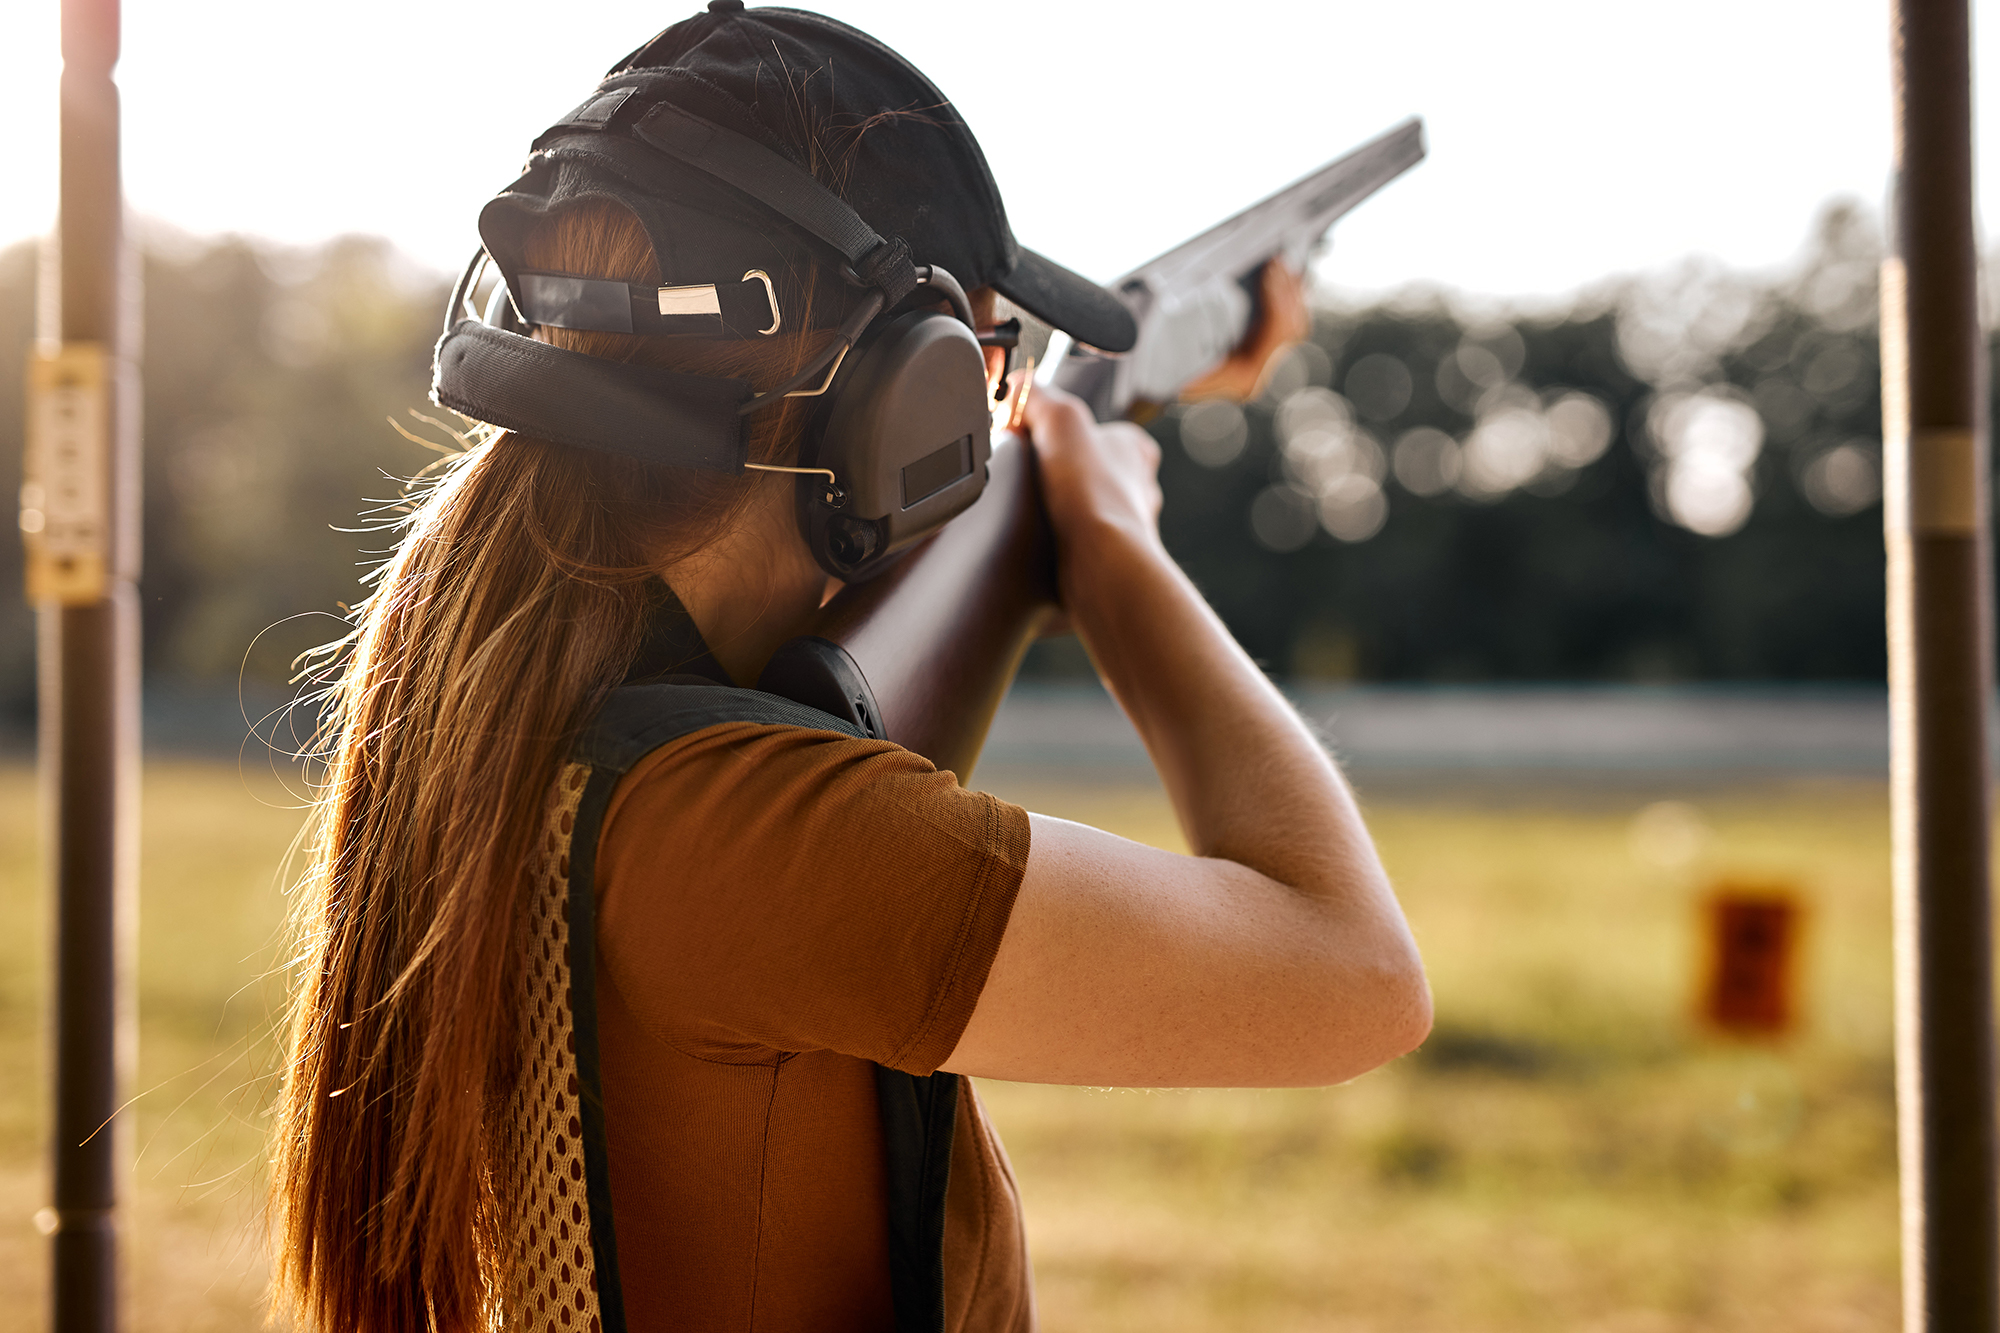 Goodyear, AZ – Benefits of Shooting for Stress Relief